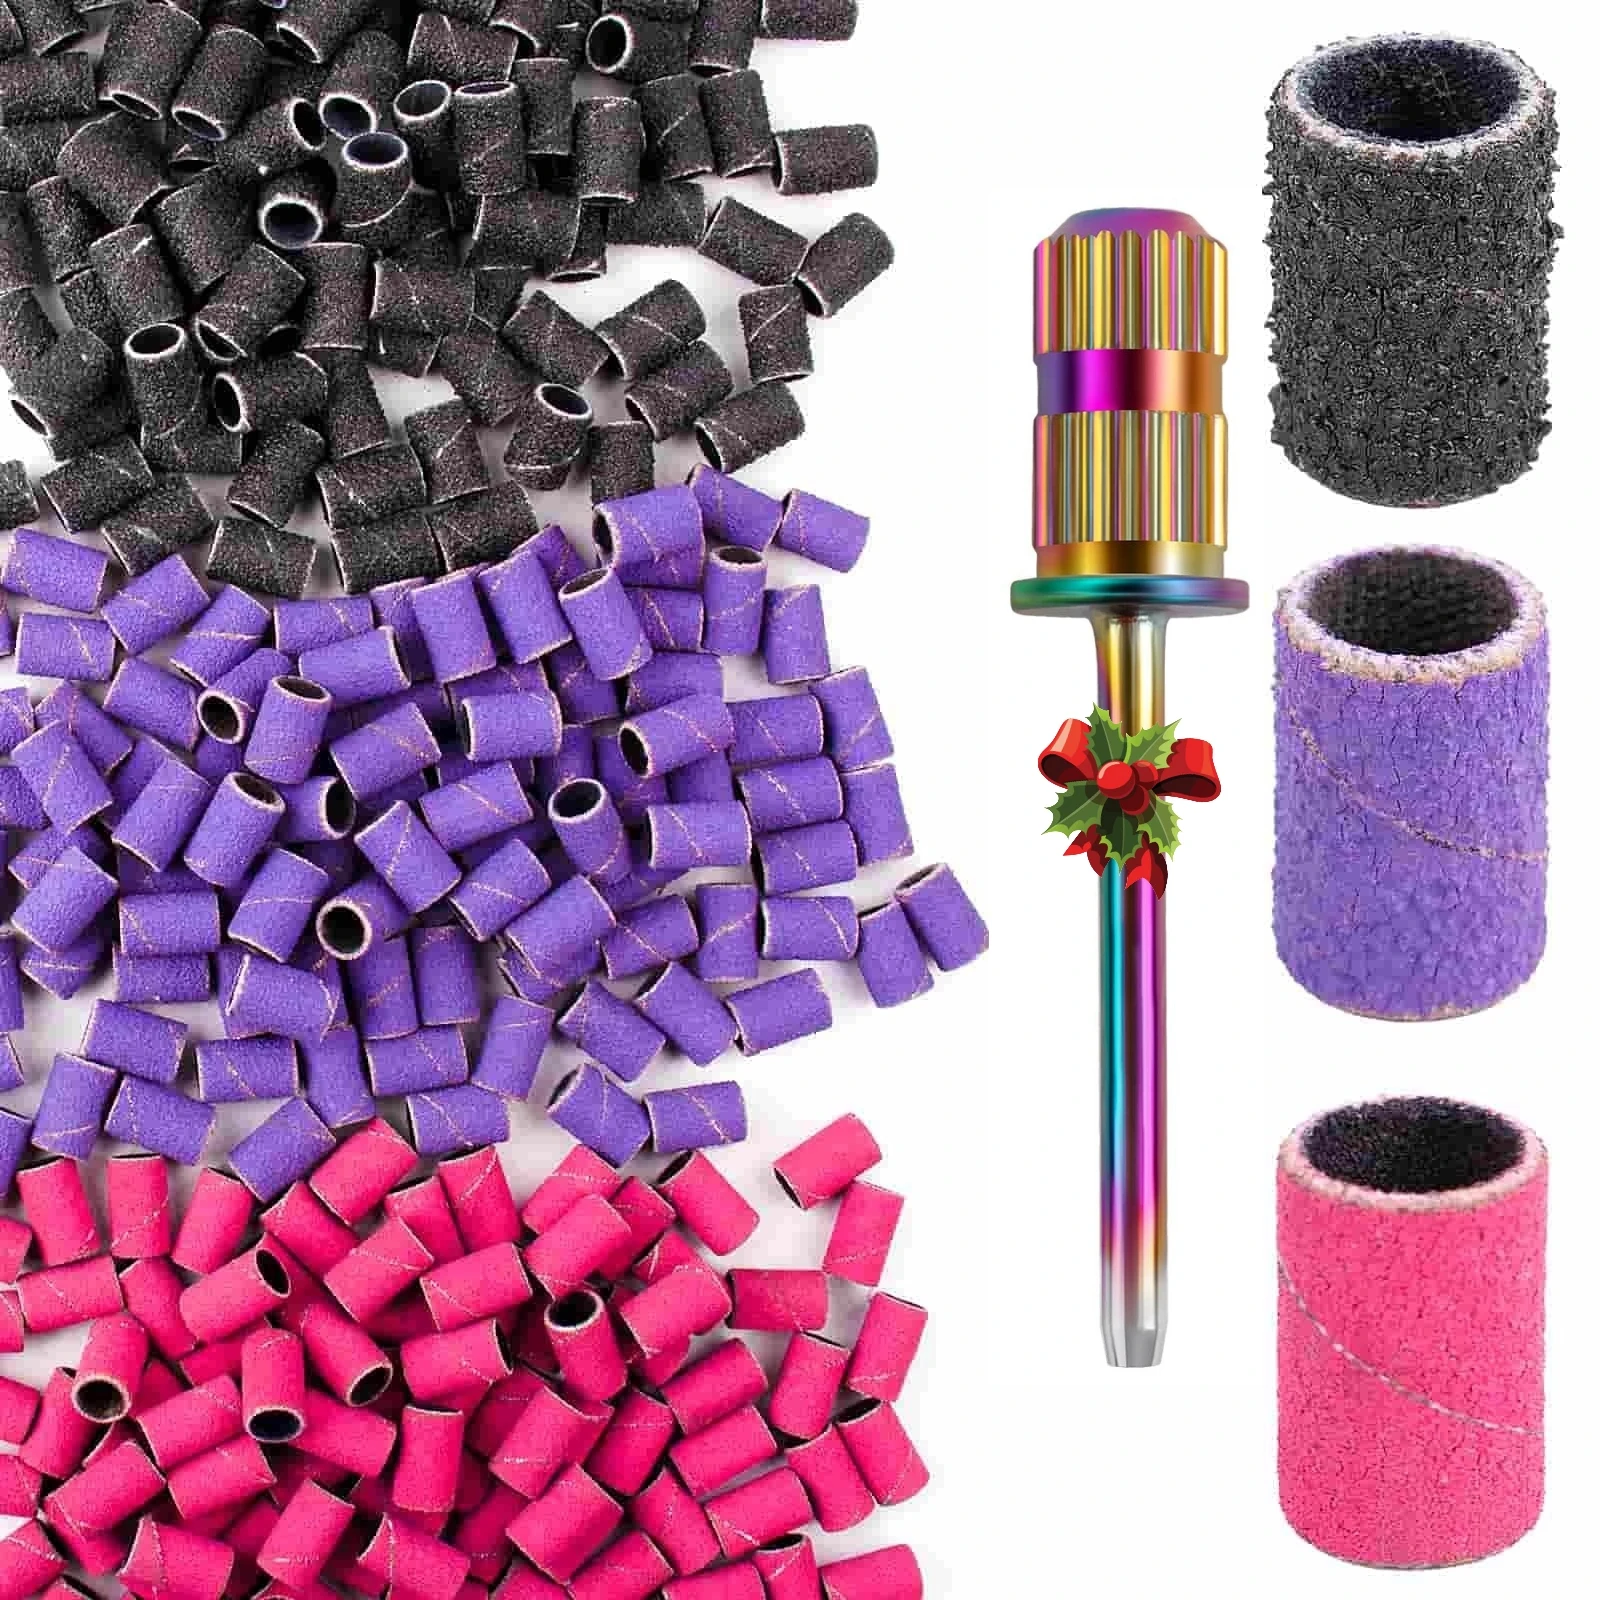 

50pcs Nail Drill Bits Sanding Bands for Nail File Coarse Fine Grits with Rainbow 3/32"Mandrel Bit for Acrylic Nails Gel Remove